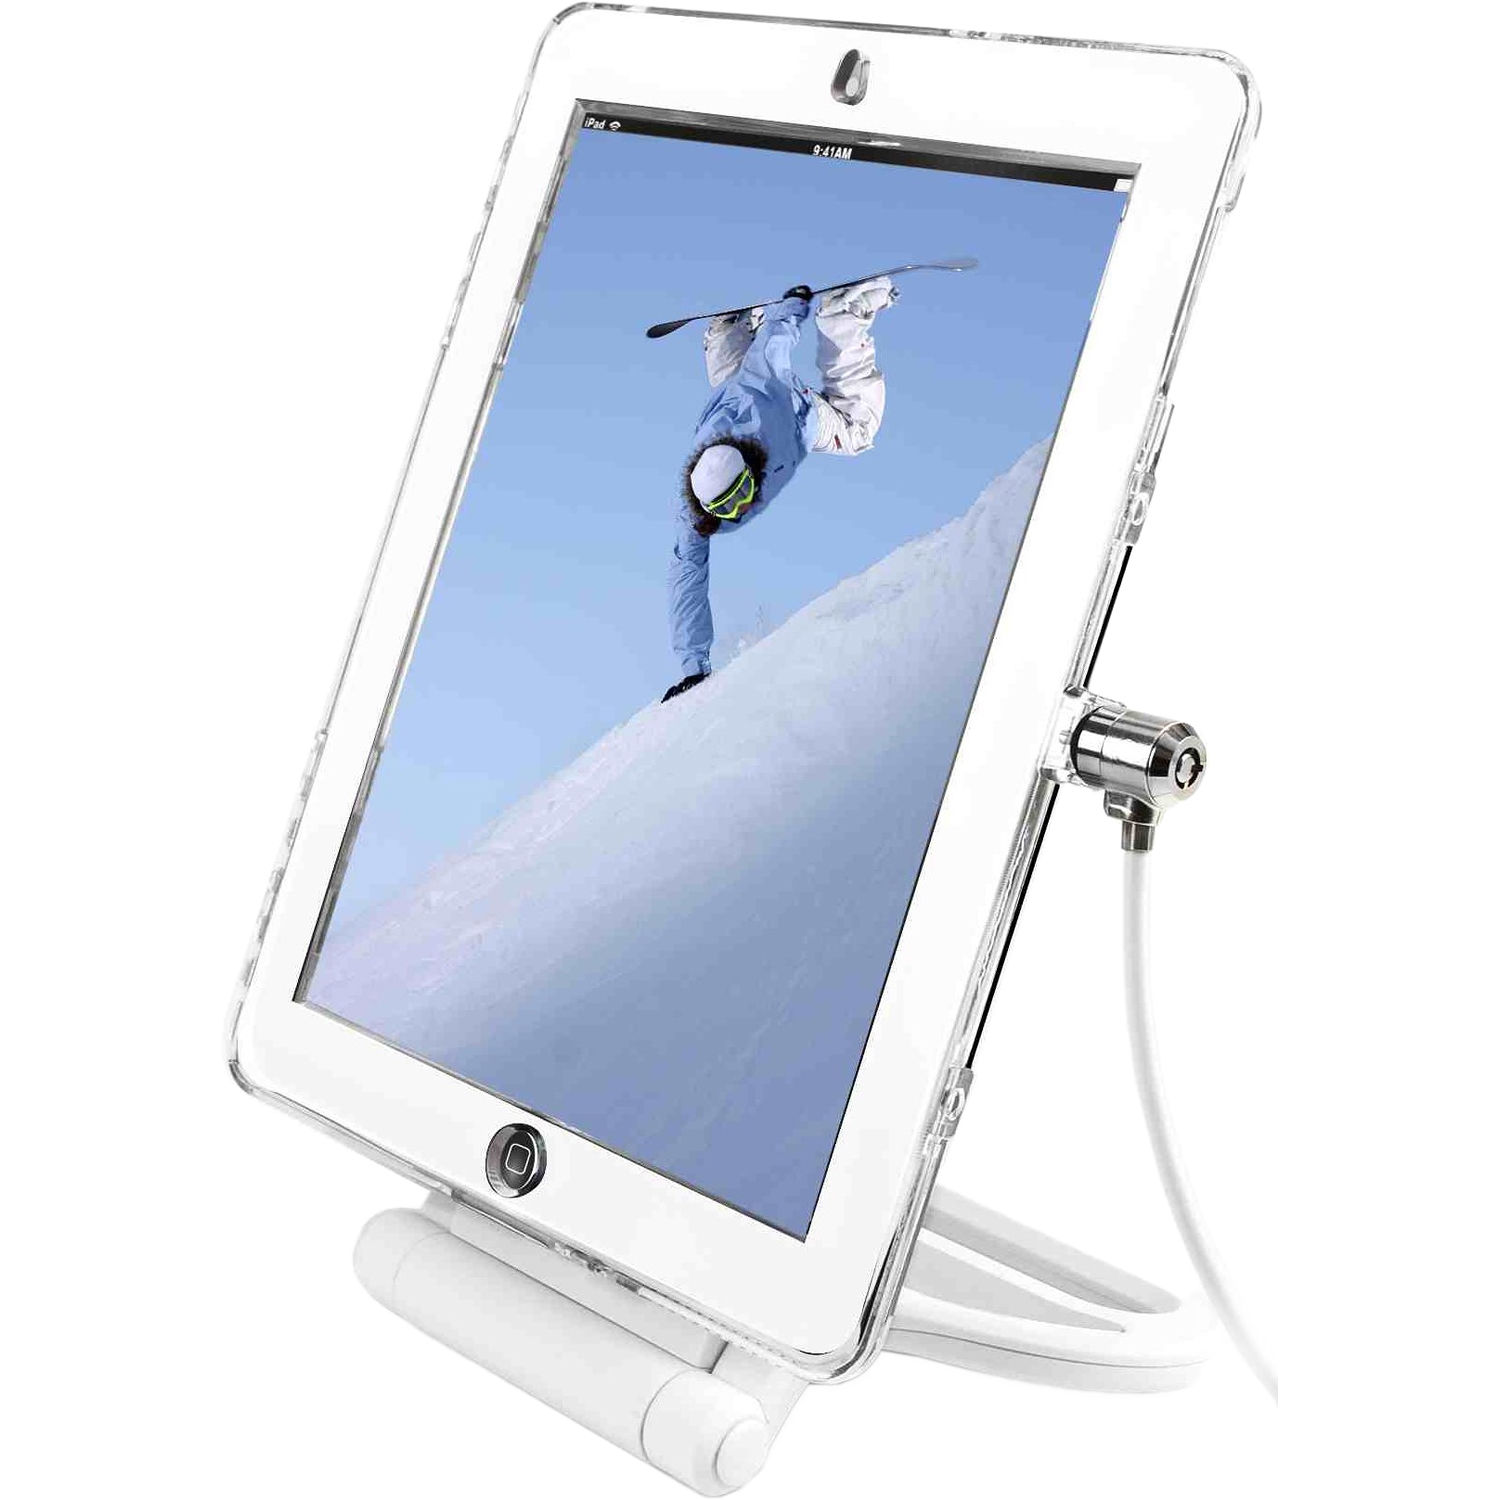 Maclocks T-Bar Cable Lock and Security Case for iPad Air/Air 2 (Clear)